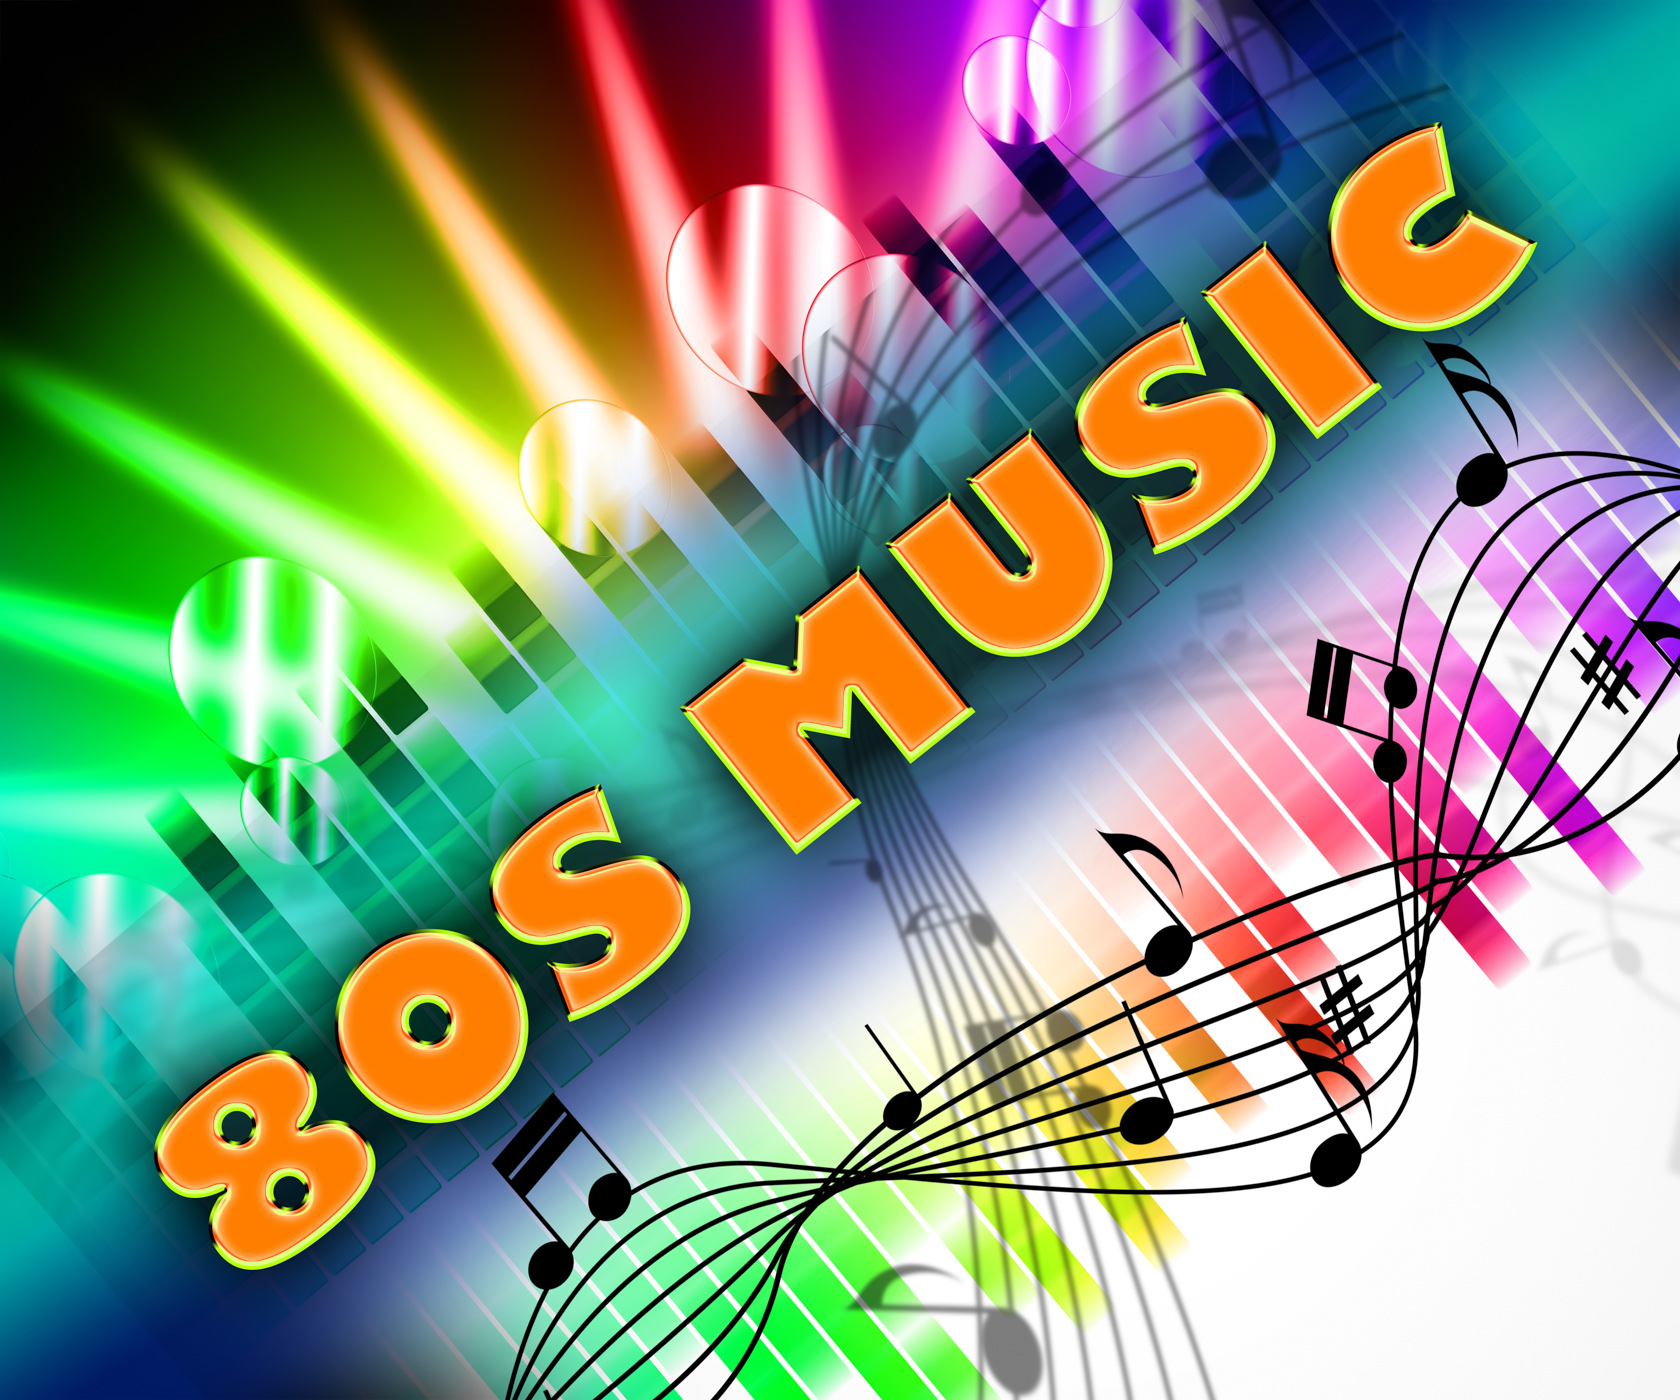 Eighties music means melodies acoustic and melody photo